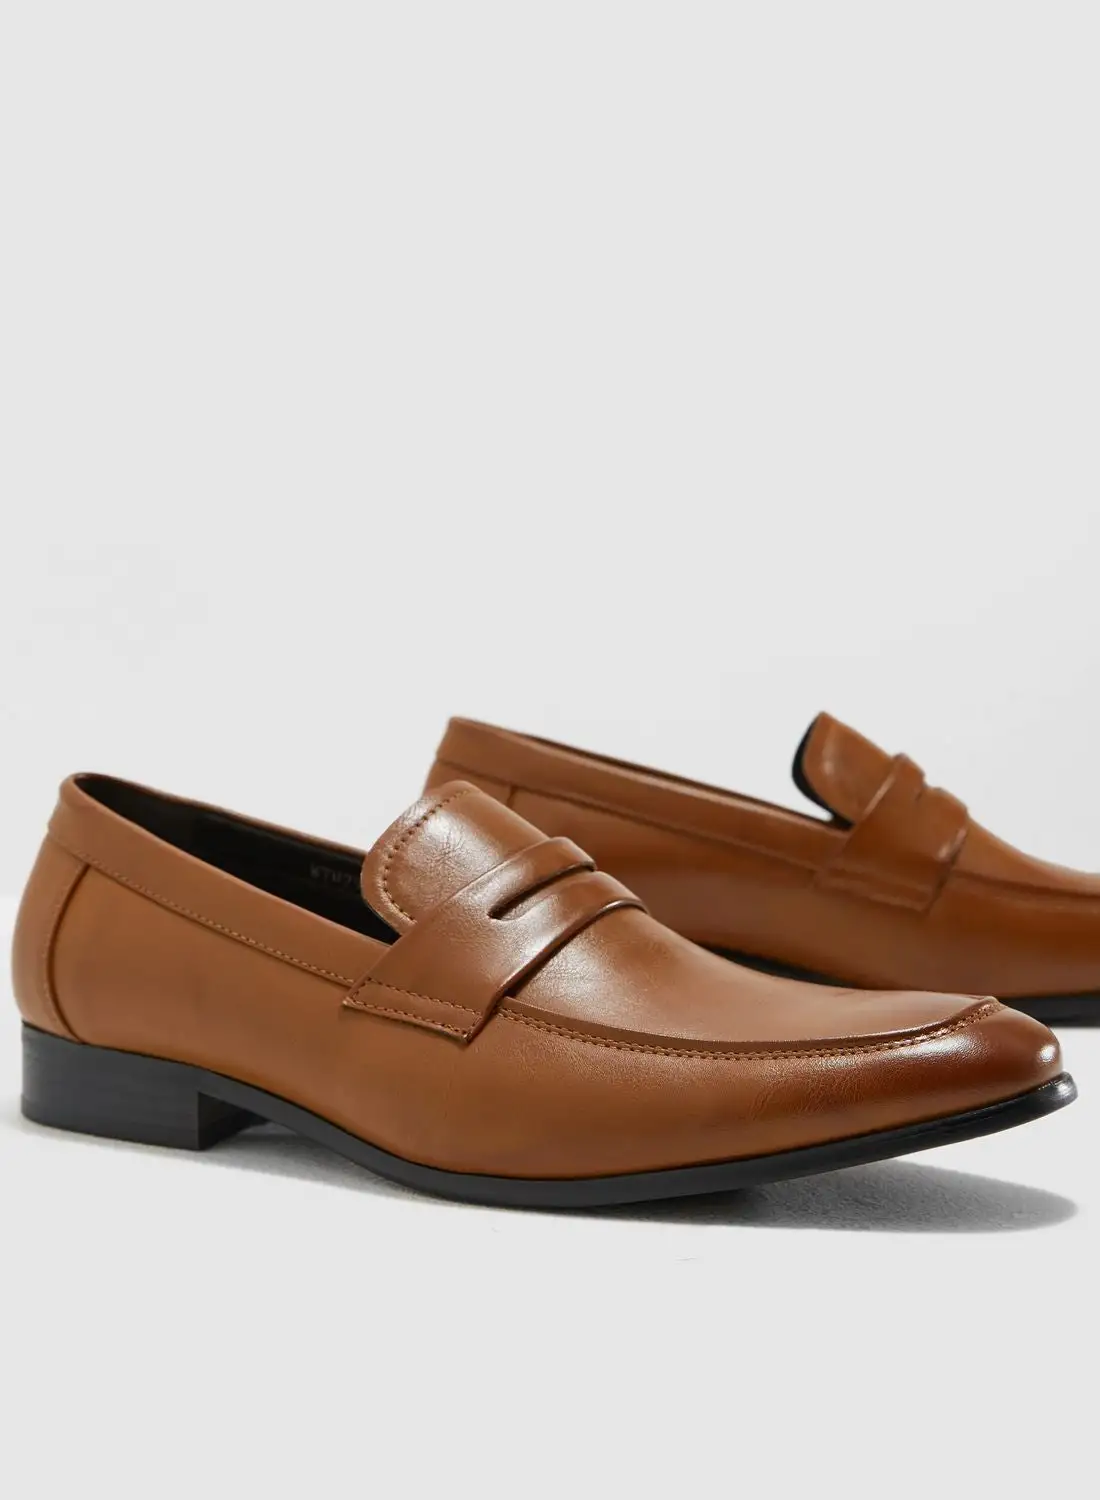 Robert Wood Classic Loafers